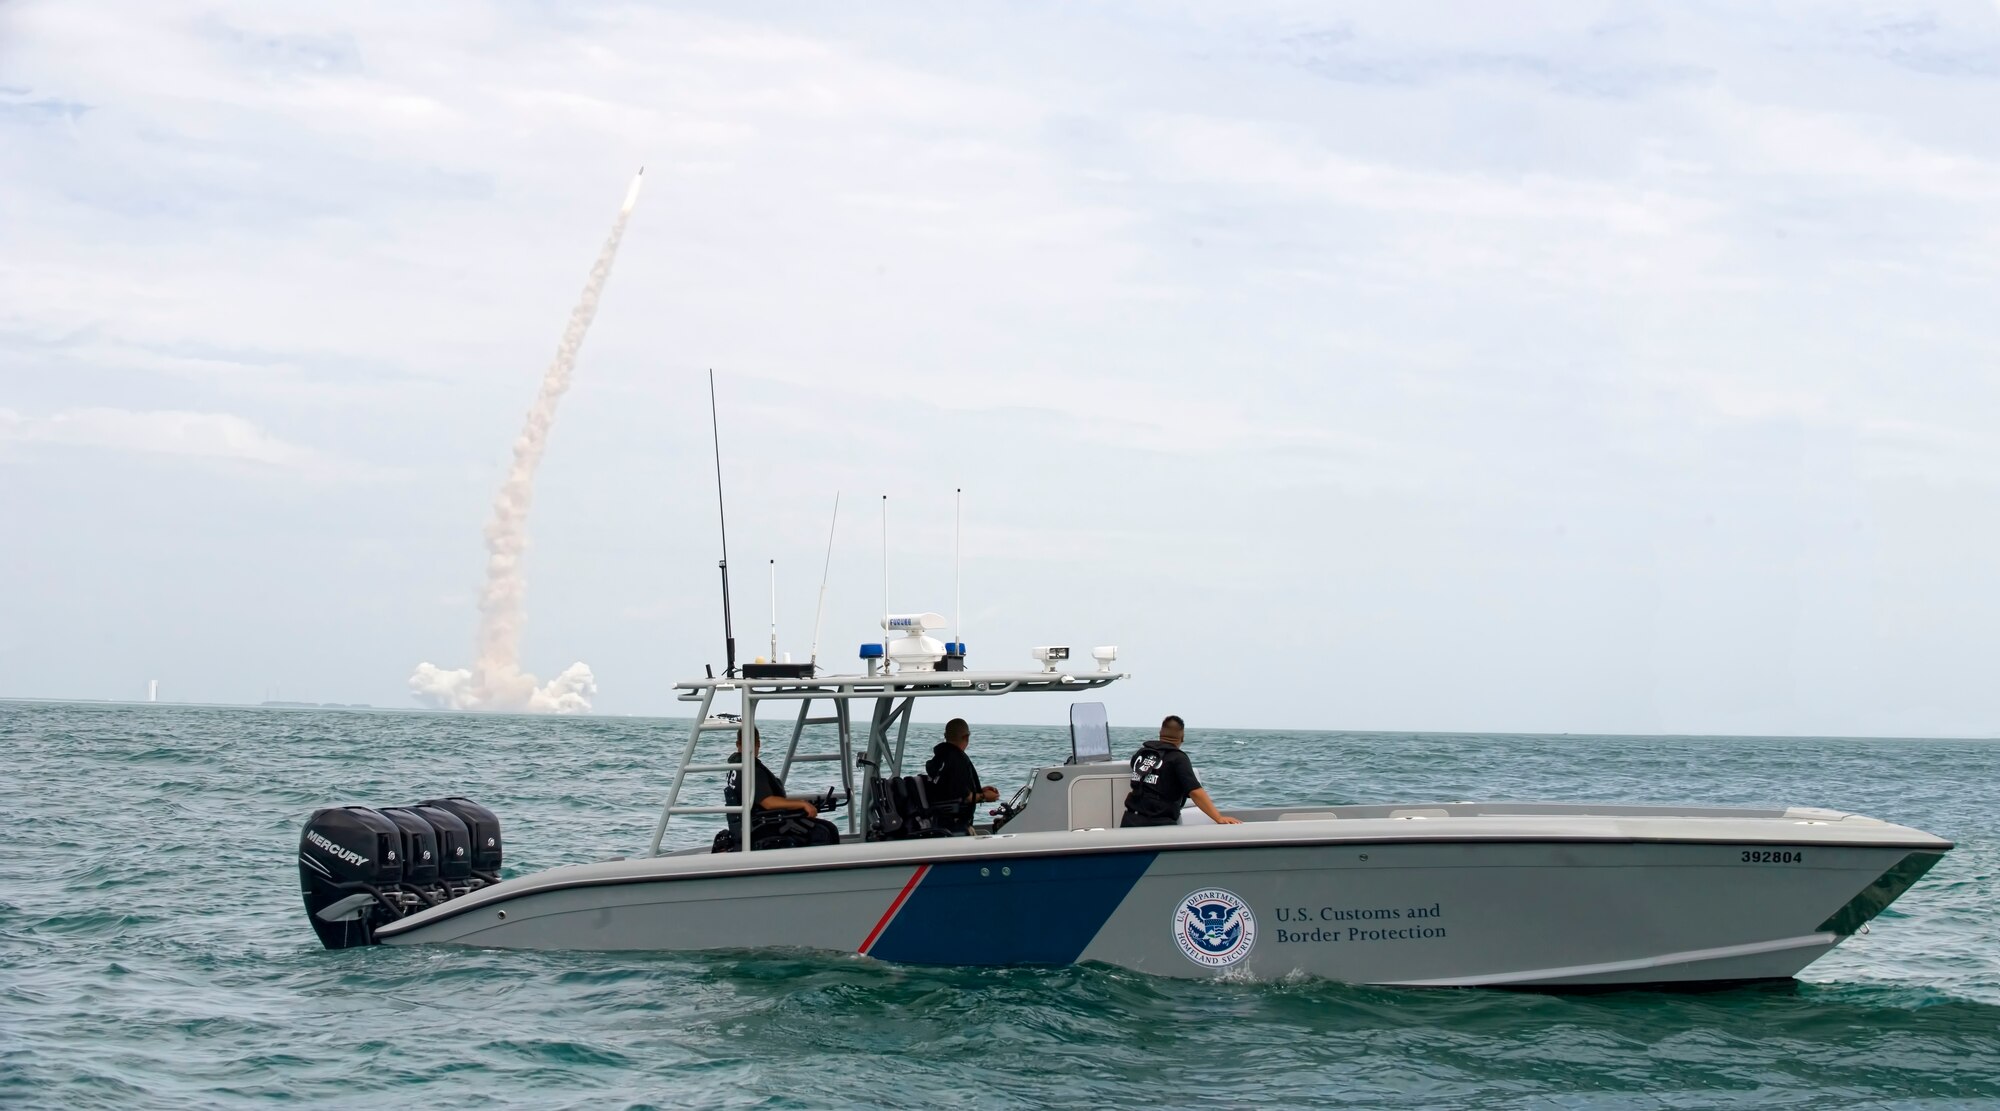 A U.S. Customs and Border Protection boat patrols the waters off Cape Canaveral AFS, Fla., during the last space shuttle launch July 8, 2011, from Kennedy Space Center. U.S. Air Force, Coast Guard and CBP personnel support space launches on the Eastern Range by securing the launch hazard area and restricted airspace. (U.S. Air Force photo/Julie Dayringer)